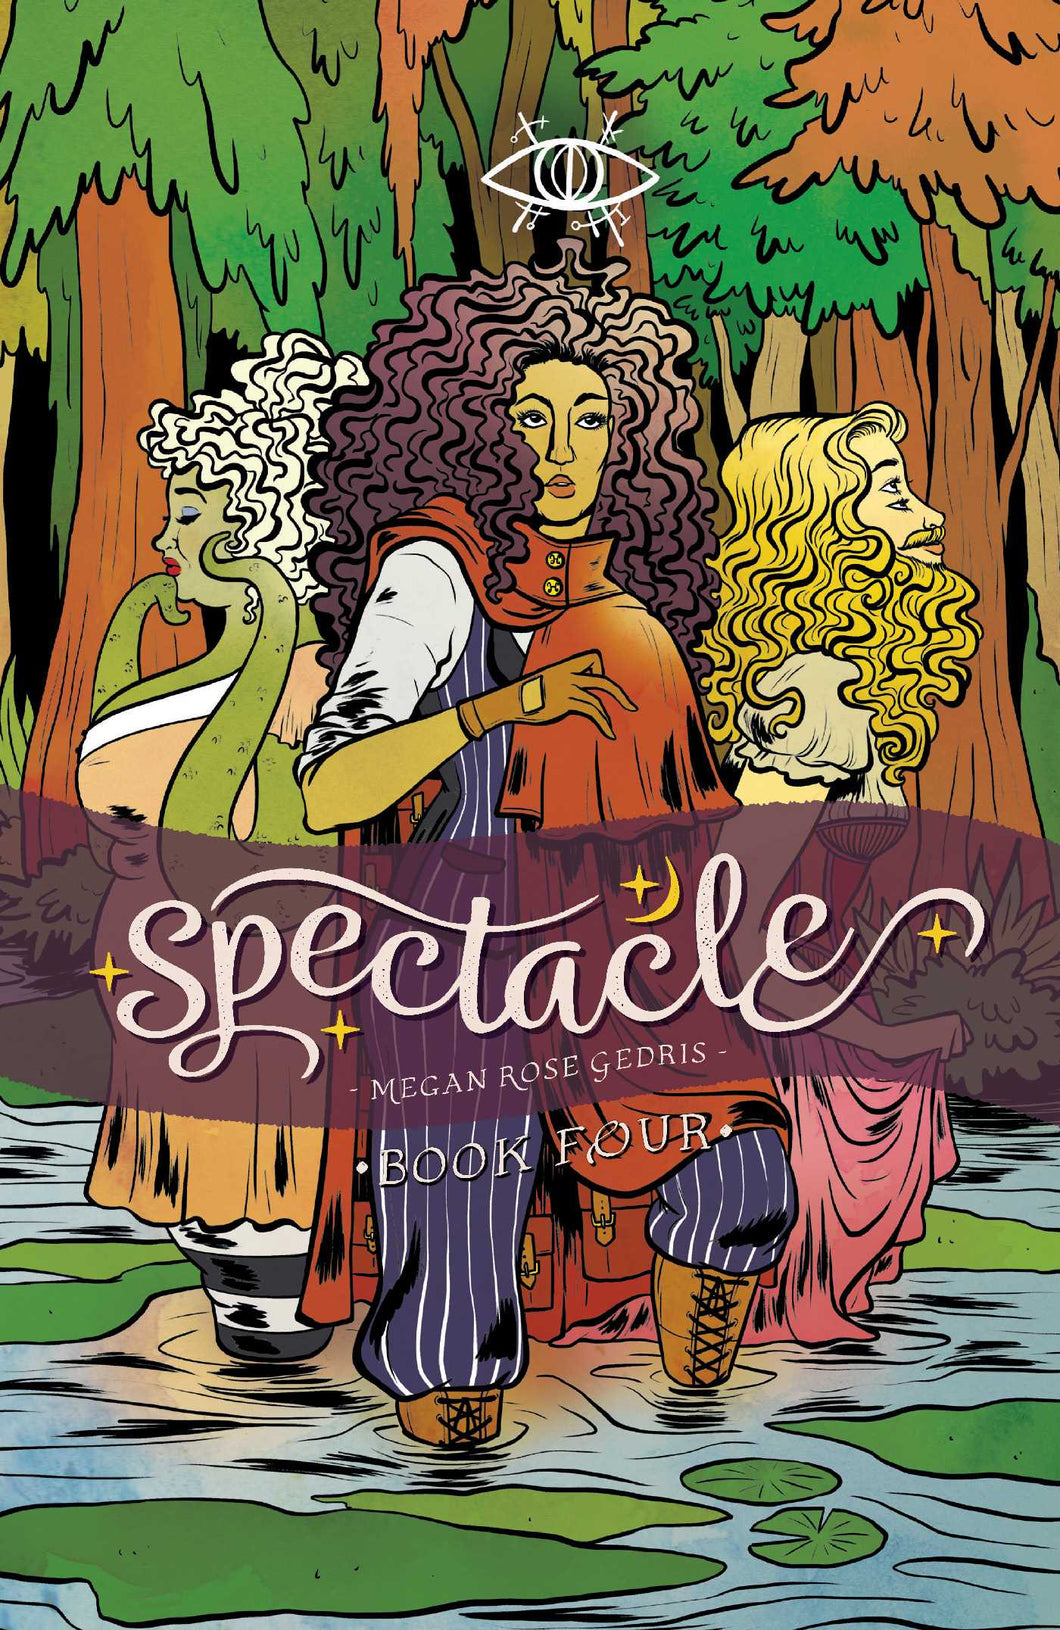 Spectacle Volume 4